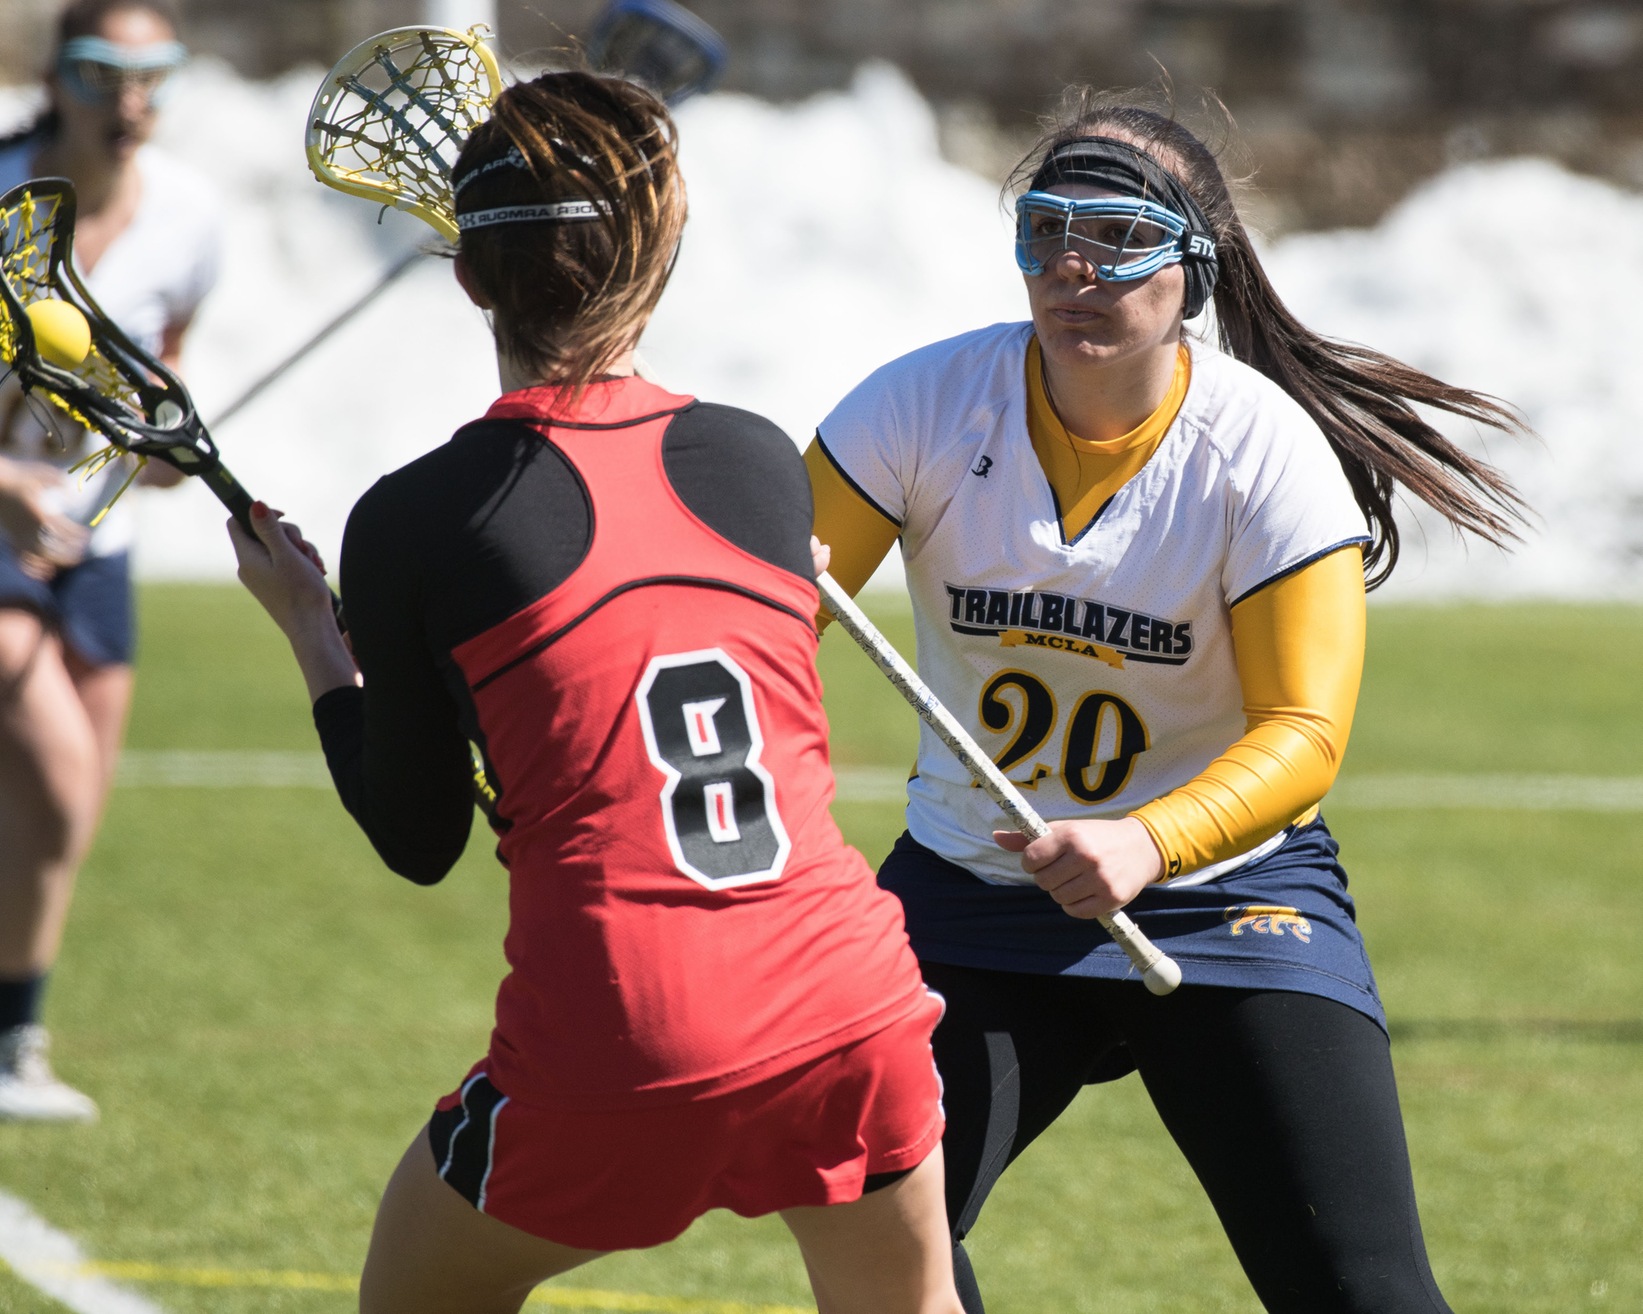 First half dooms lacrosse as they fall to Becker